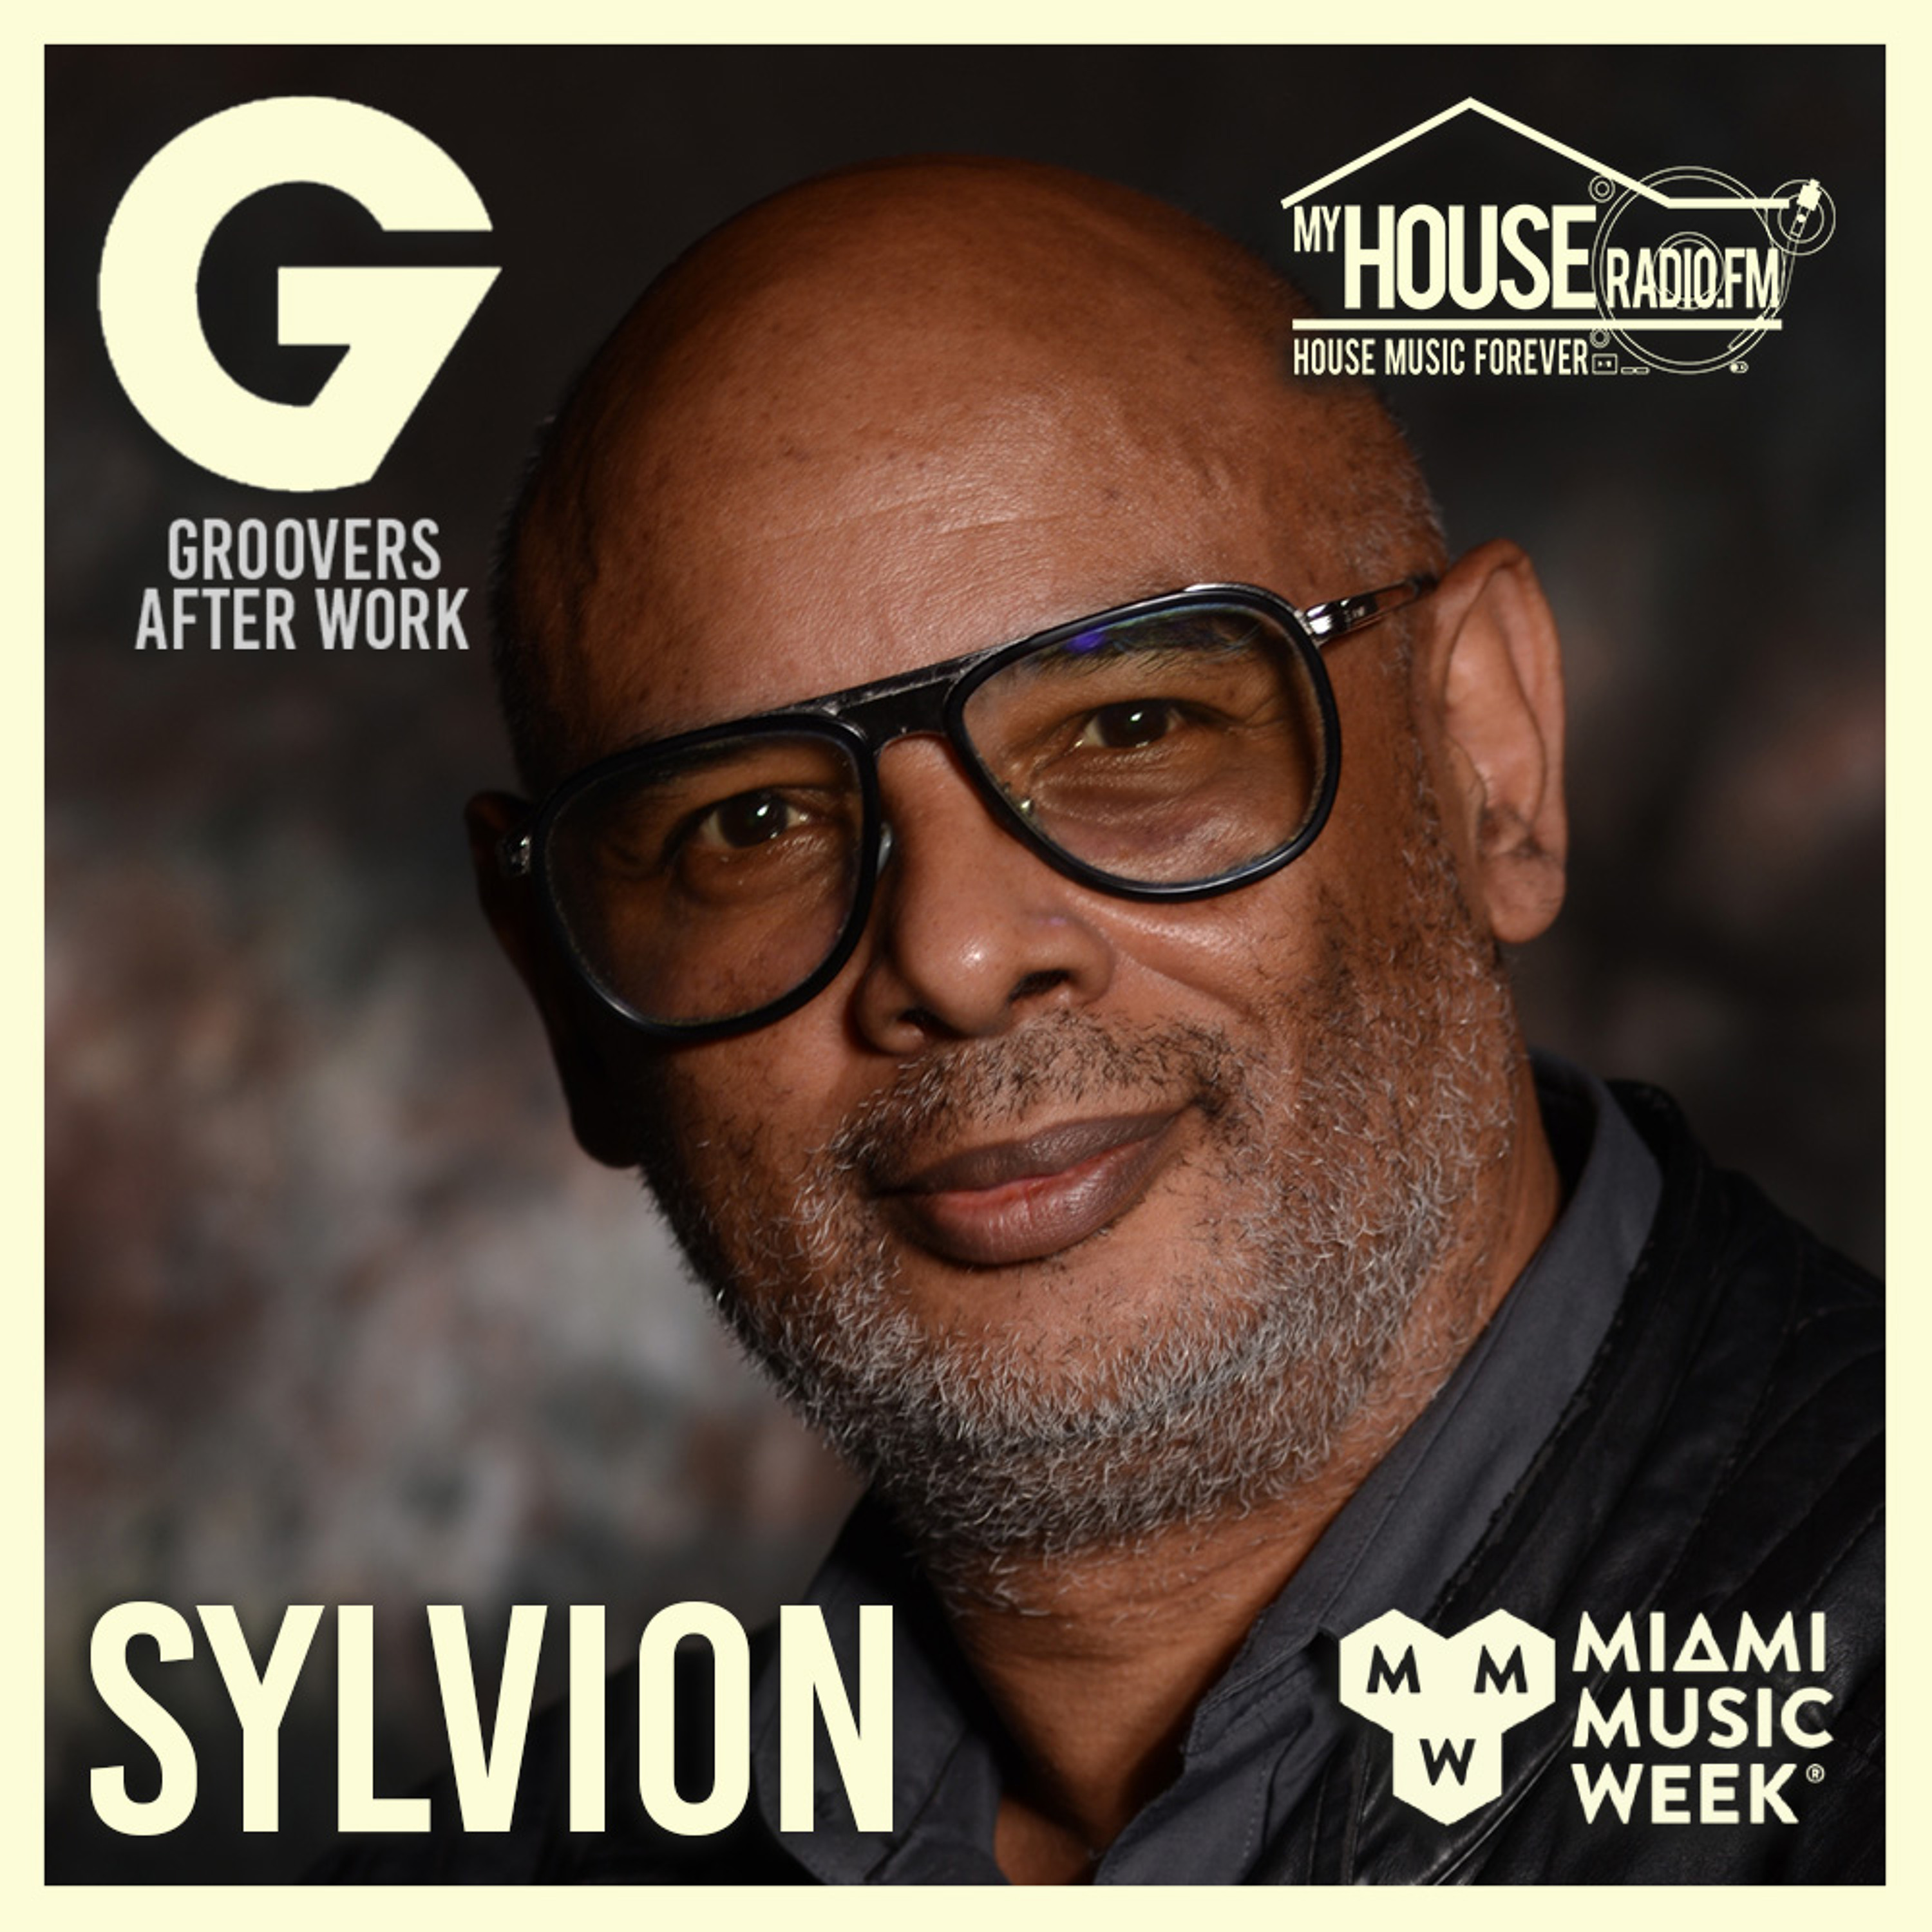 23#13-2 After Work On My House Radio By SylvioN